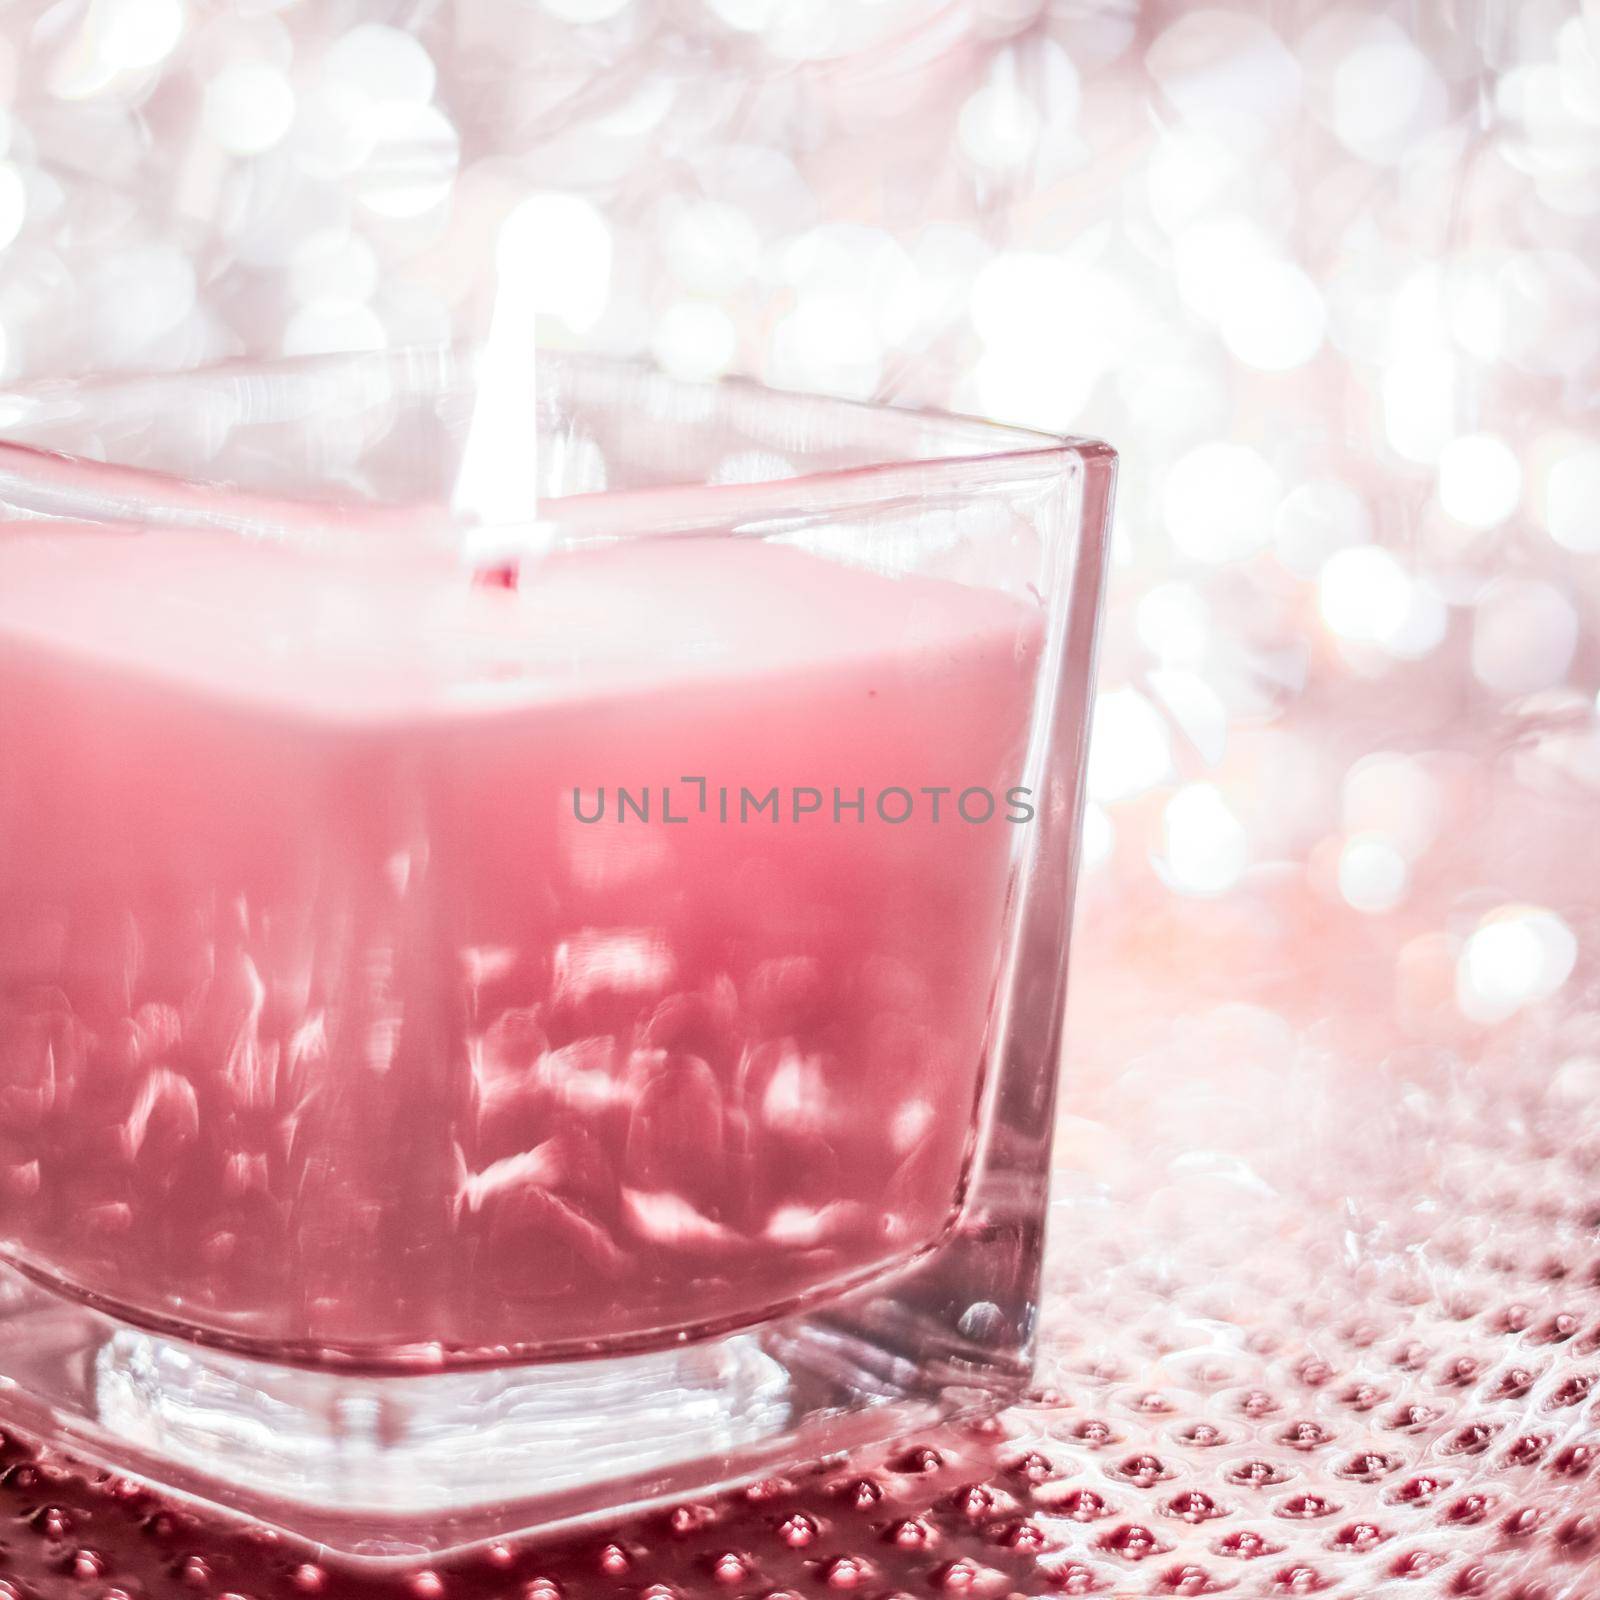 Rose aromatic candle on Christmas and New Years glitter background, Valentines Day luxury home decor and holiday season brand design by Anneleven